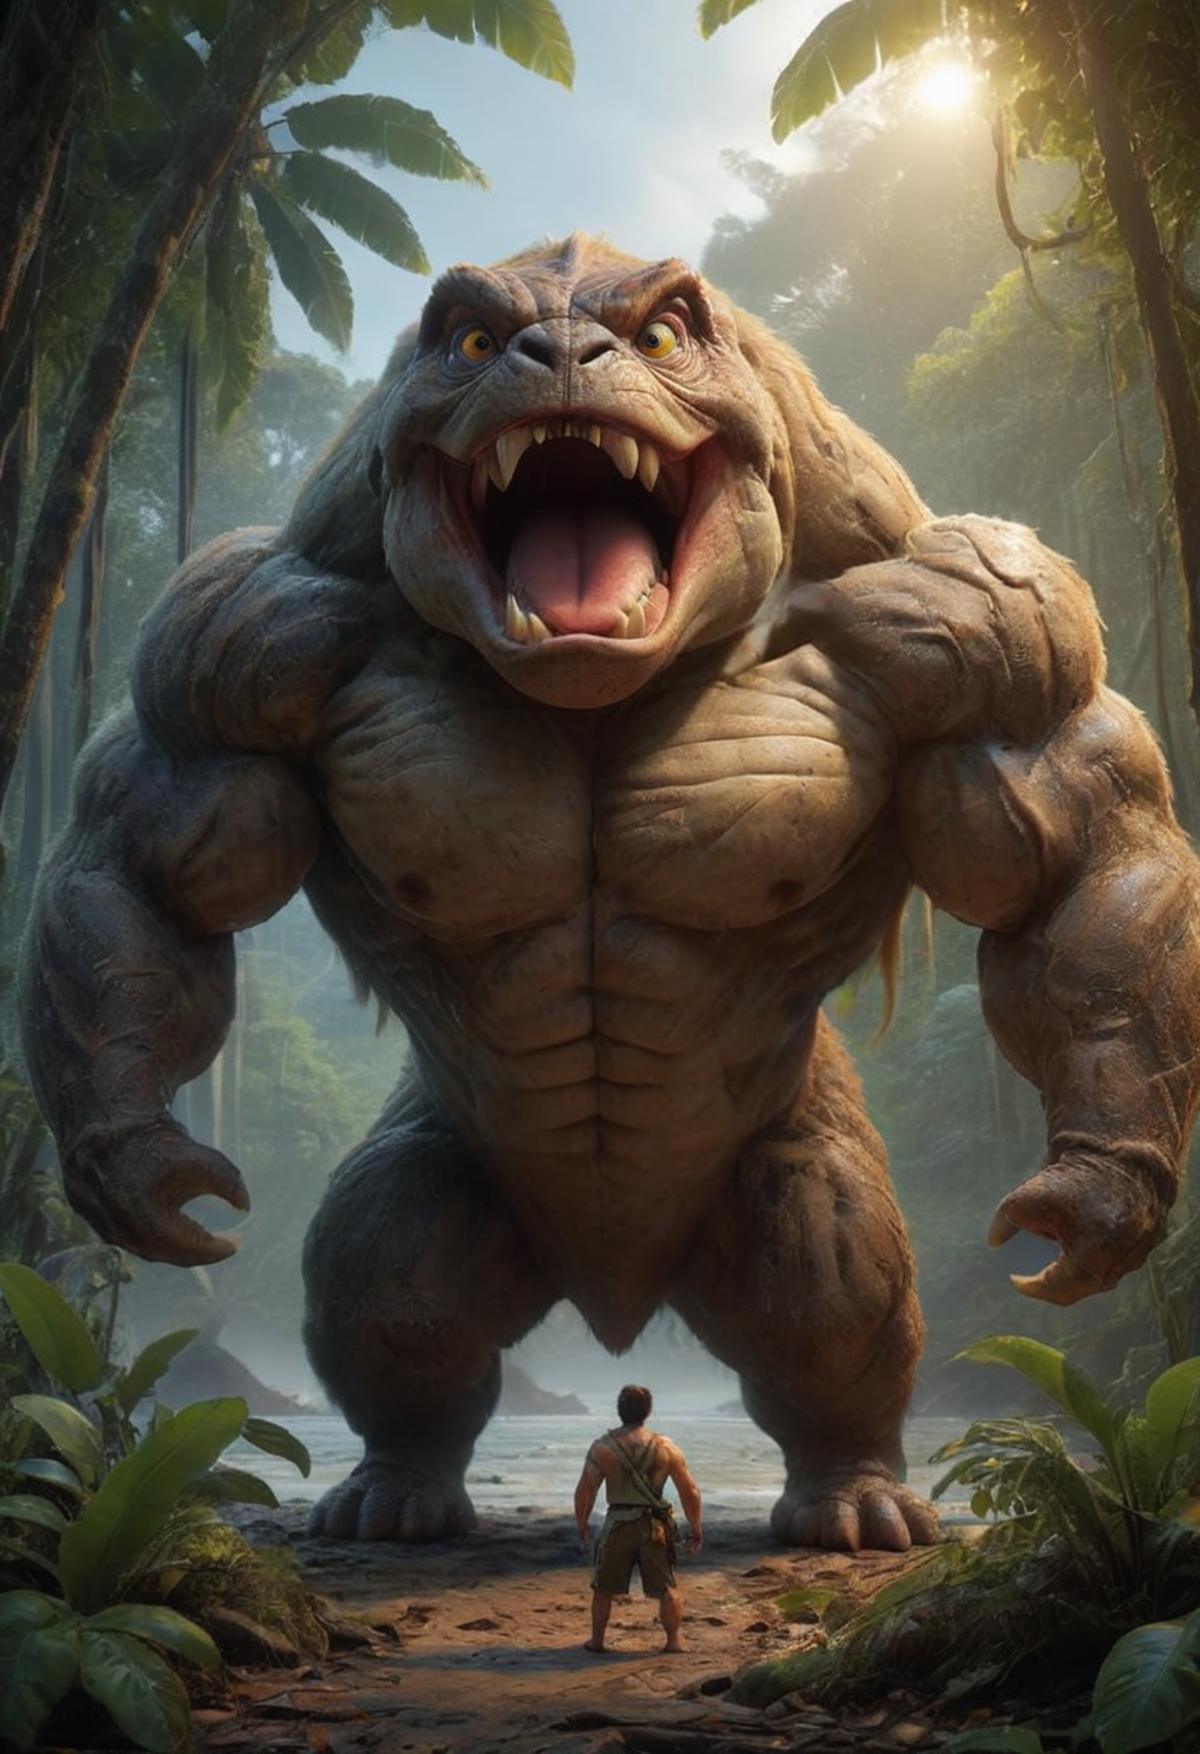 Cartoon Monster with Muscles and Teeth, Open Mouth, and Large Fangs.